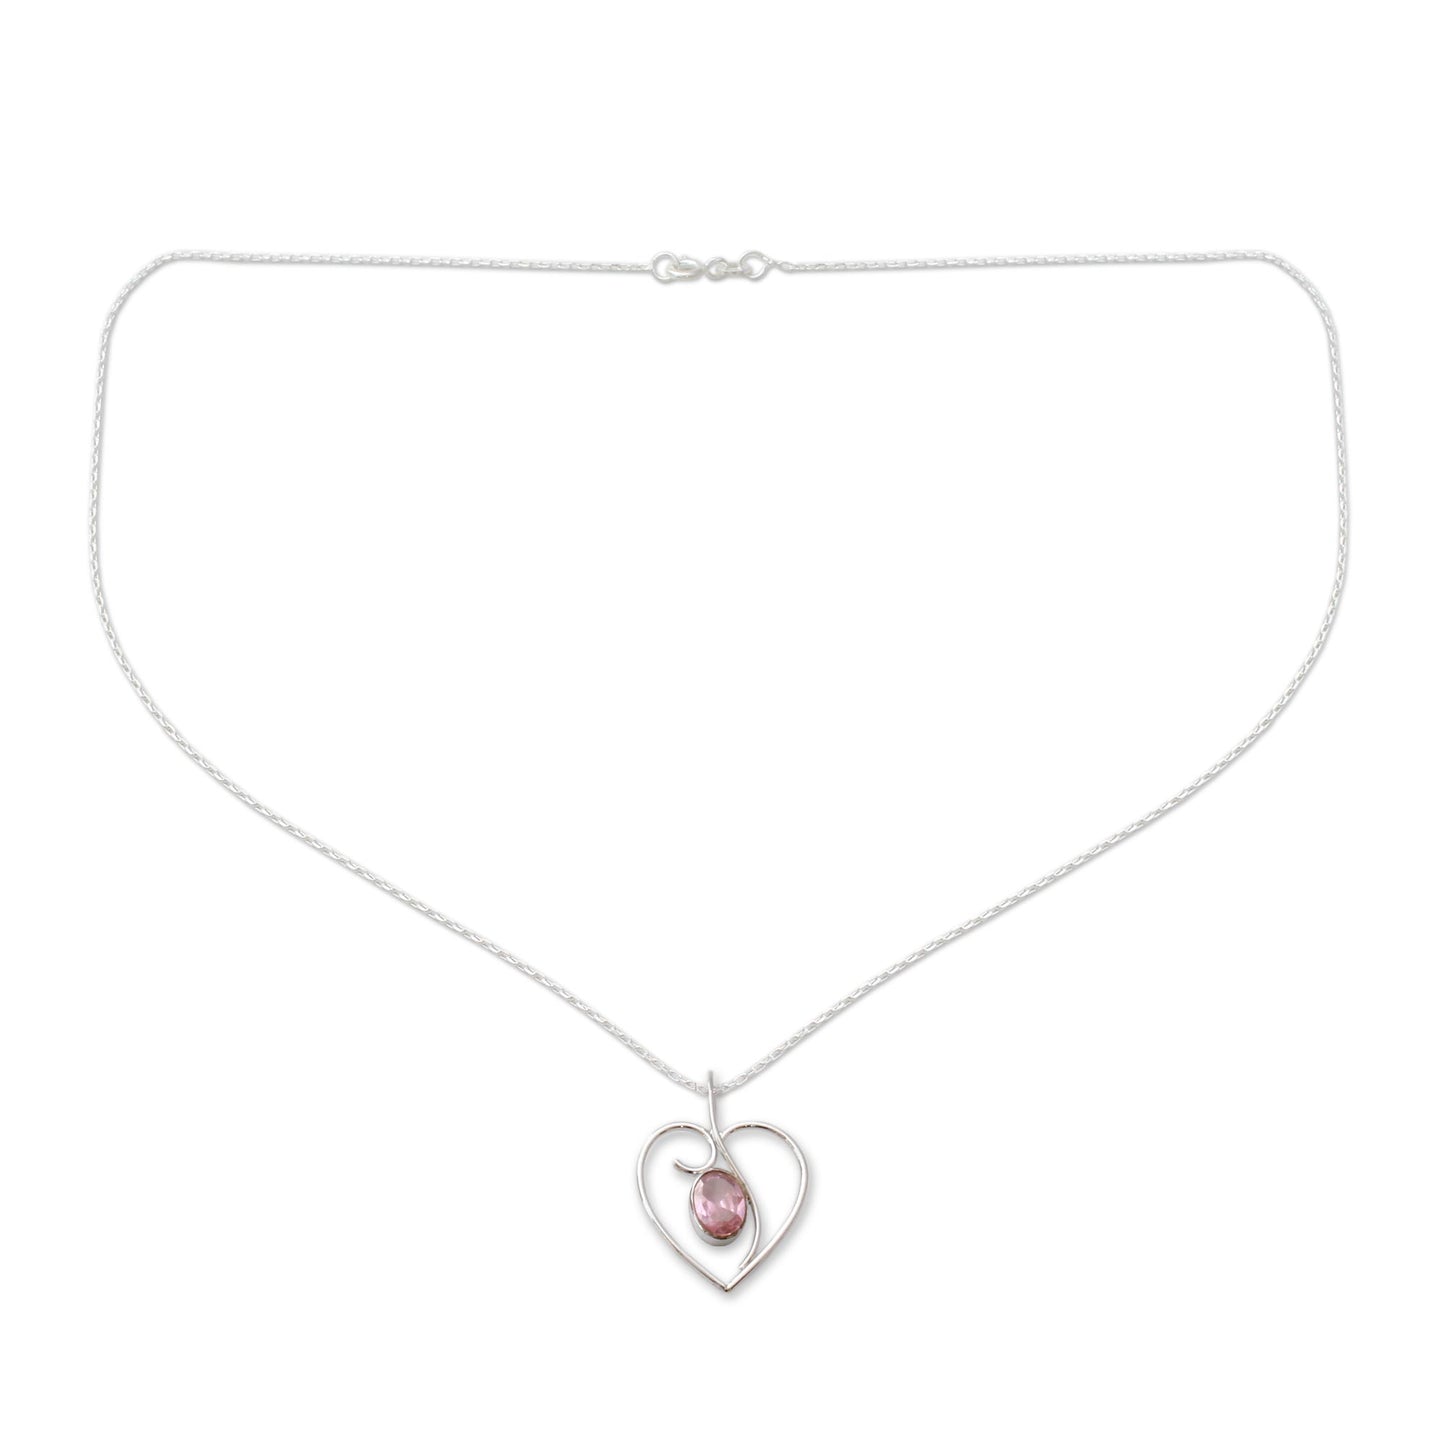 Pink Romance Heart Jewelry Necklace in Sterling Silver and Pink CZ